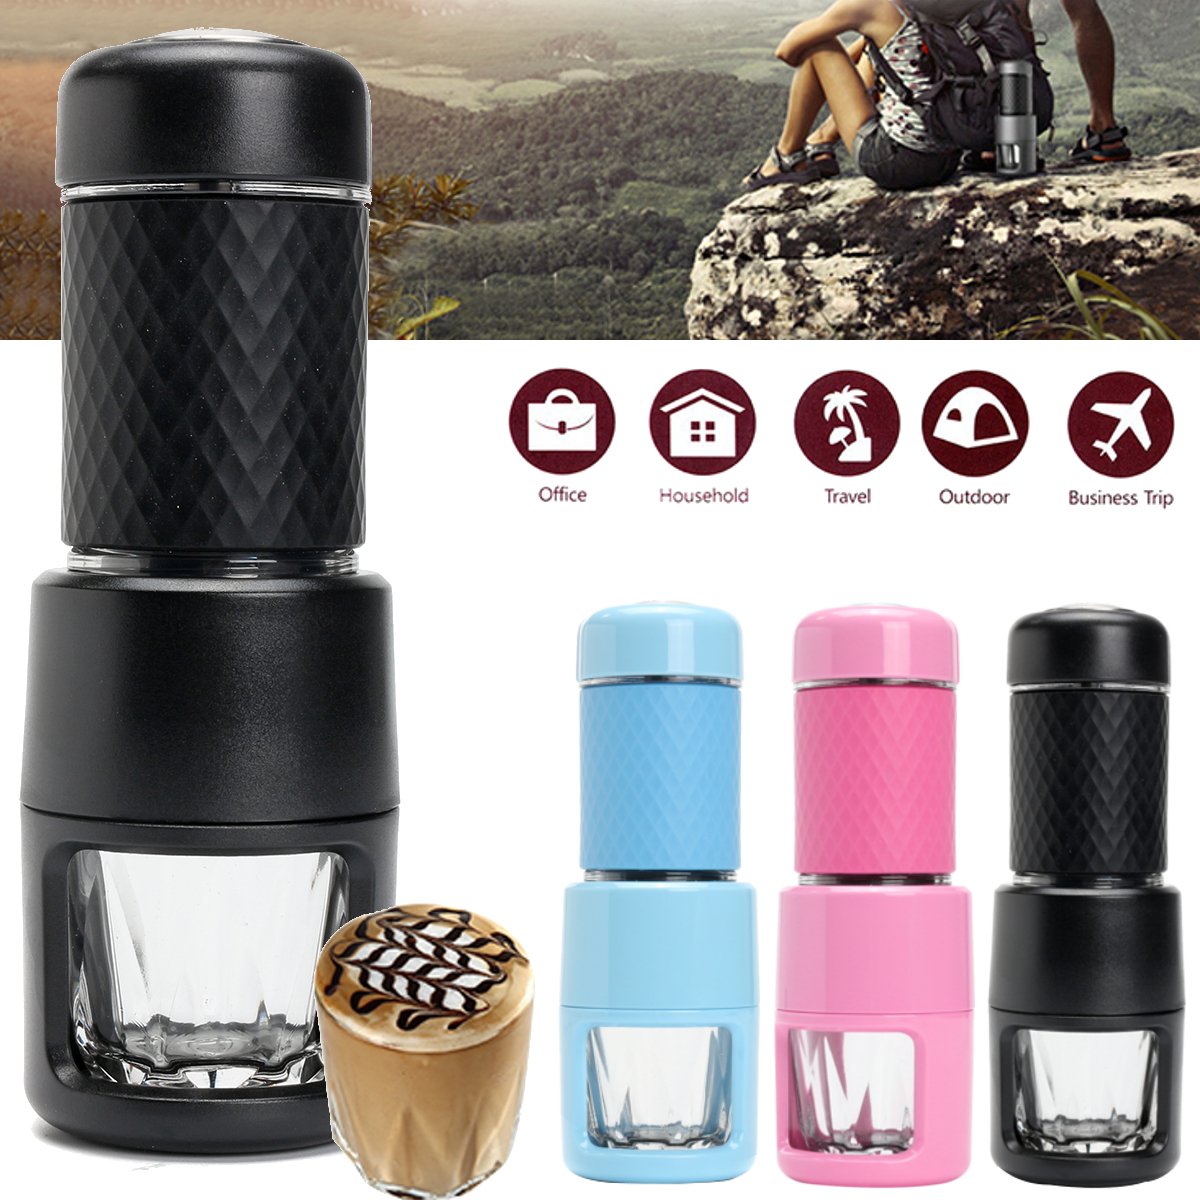 Portable Coffee Maker Travel Handheld Mini Manual Espresso Machine For Outdoor Camping Home Use 1